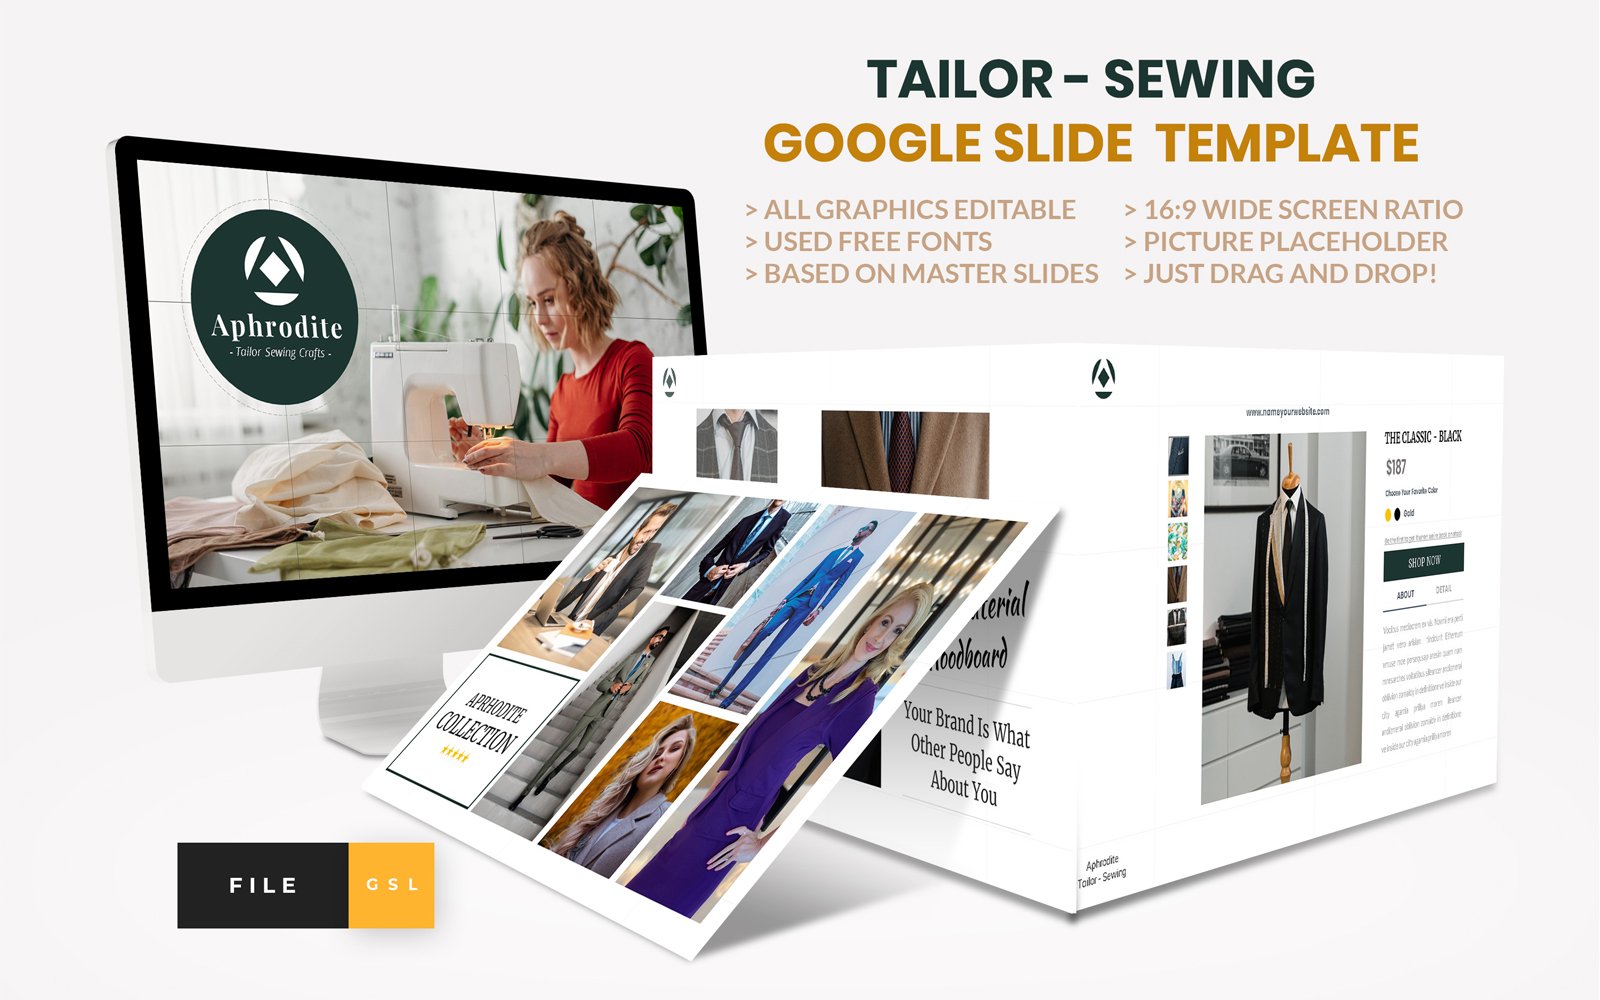 Tailor - Sewing Fashion Craft Google Slide Template